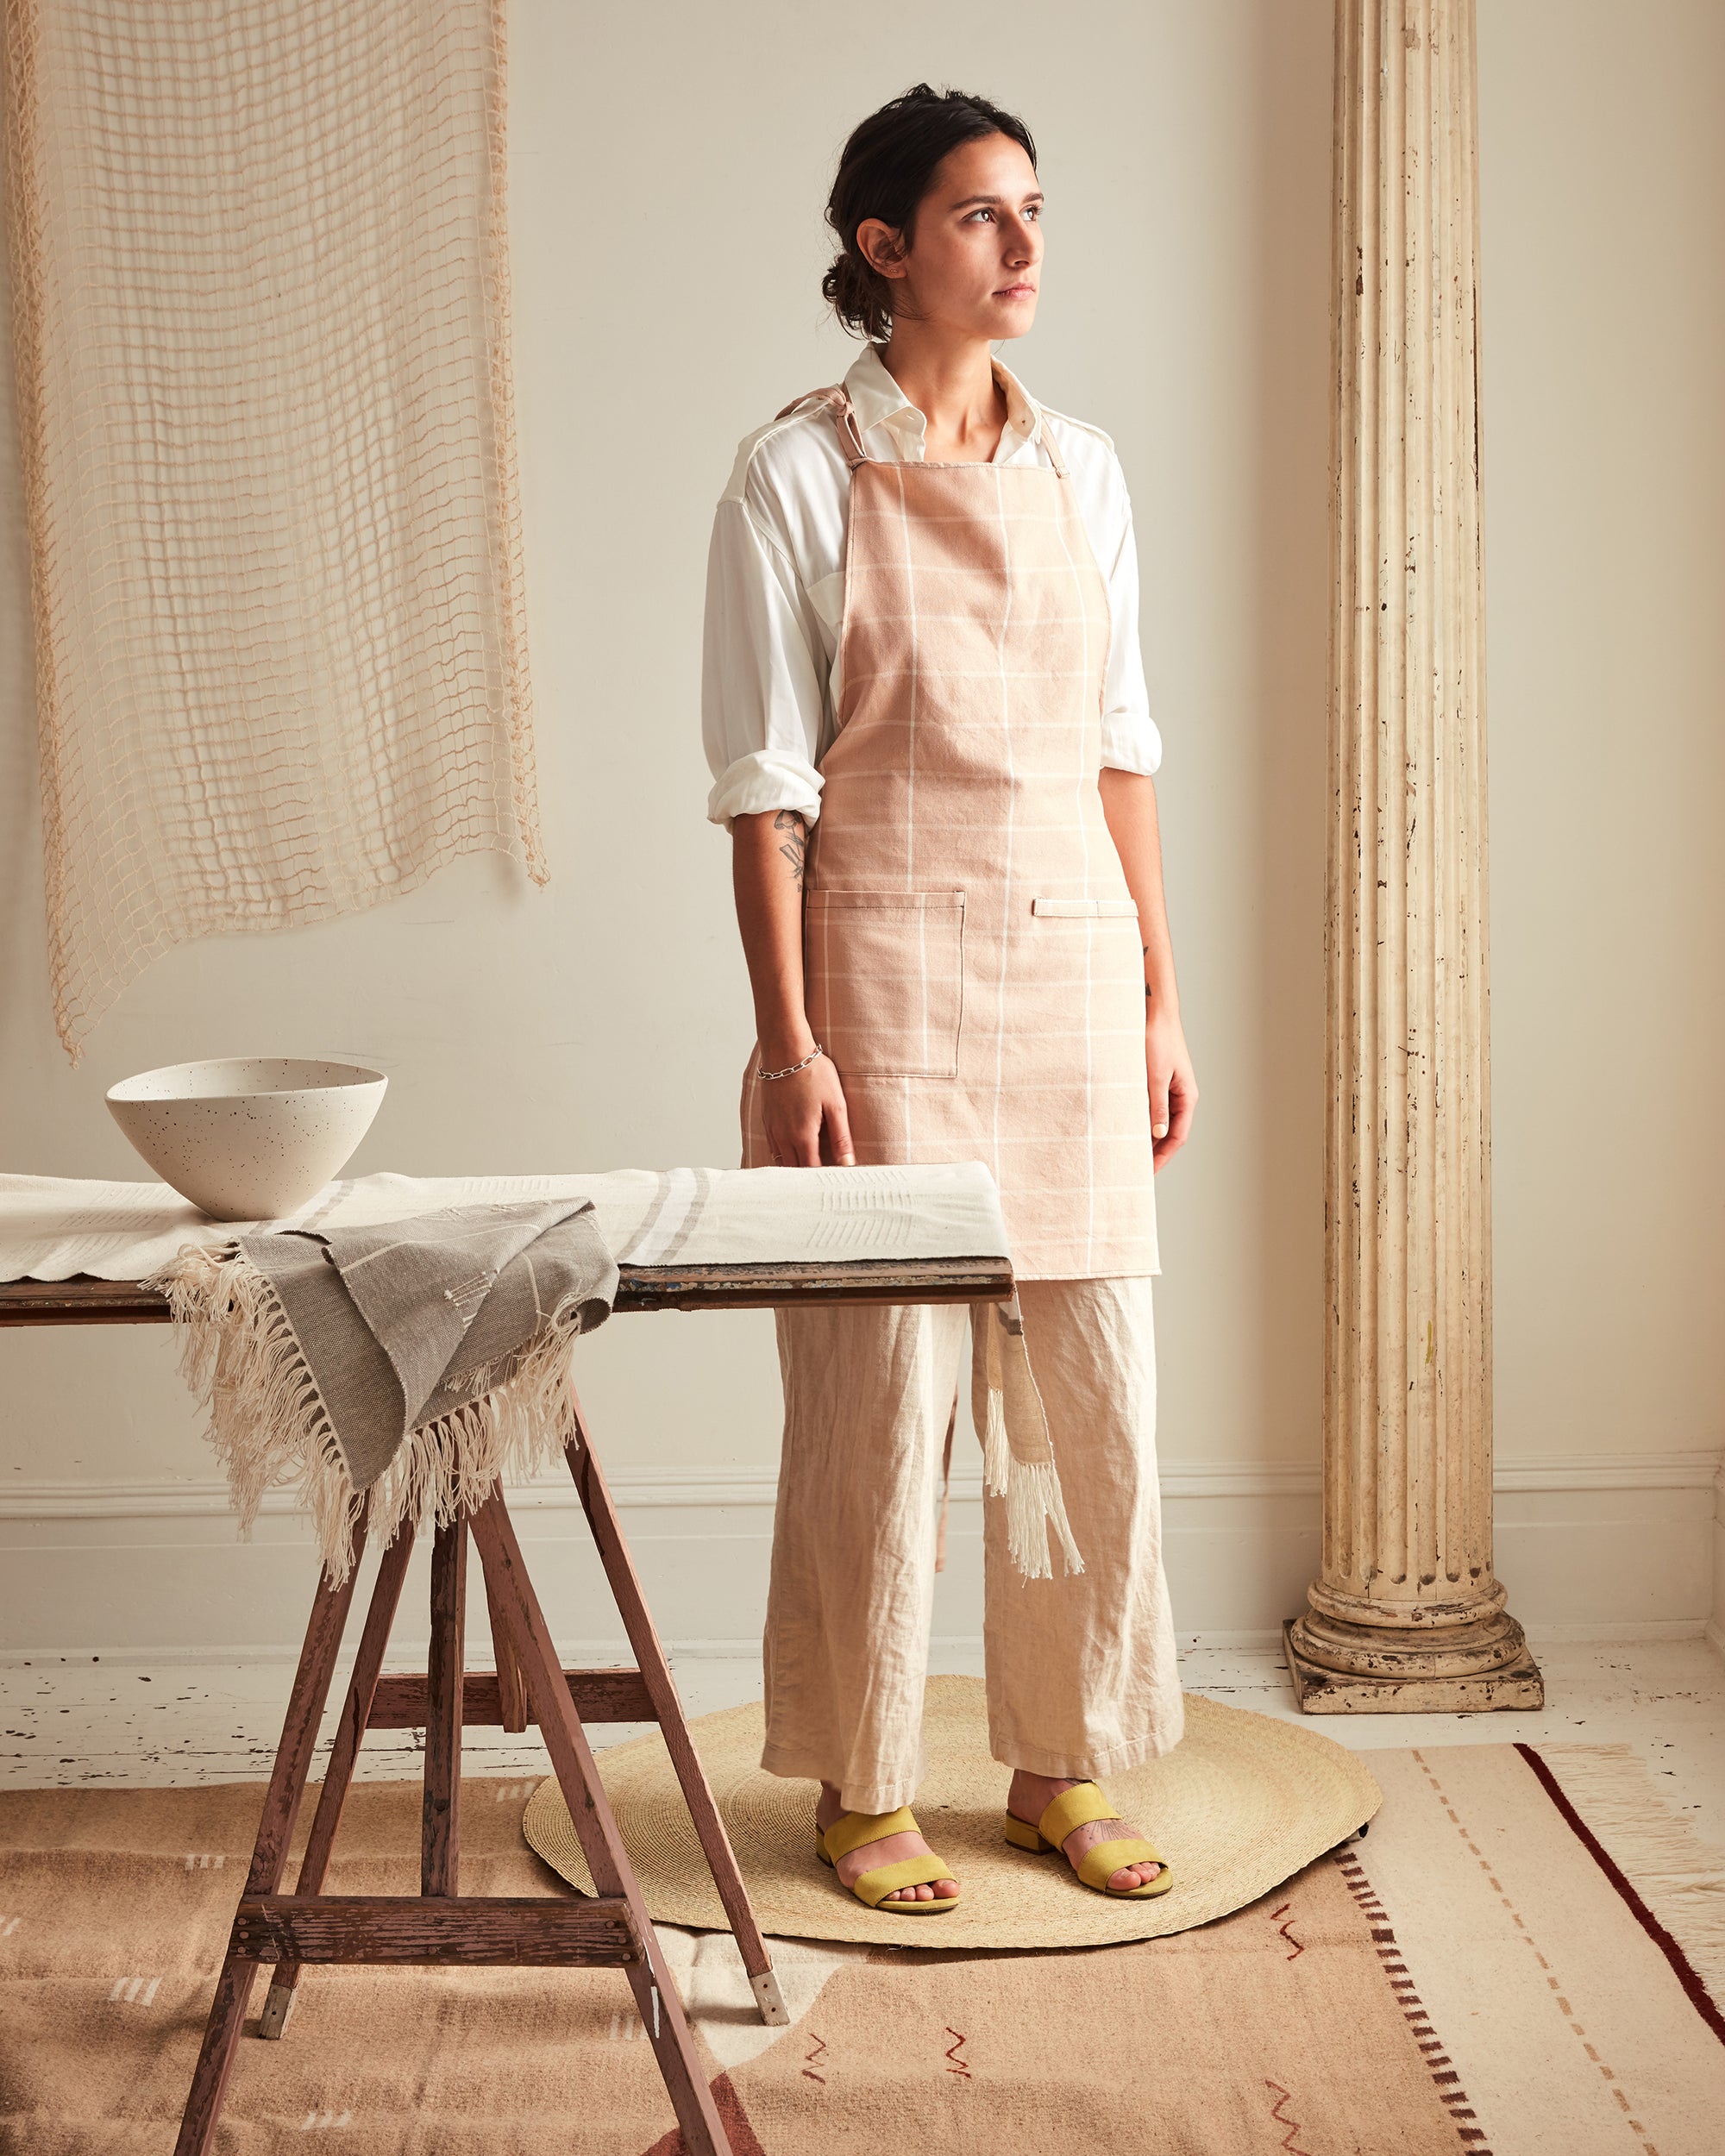 A person wears the ethically handwoven MINNA cotton kitchen apron in peach grid.